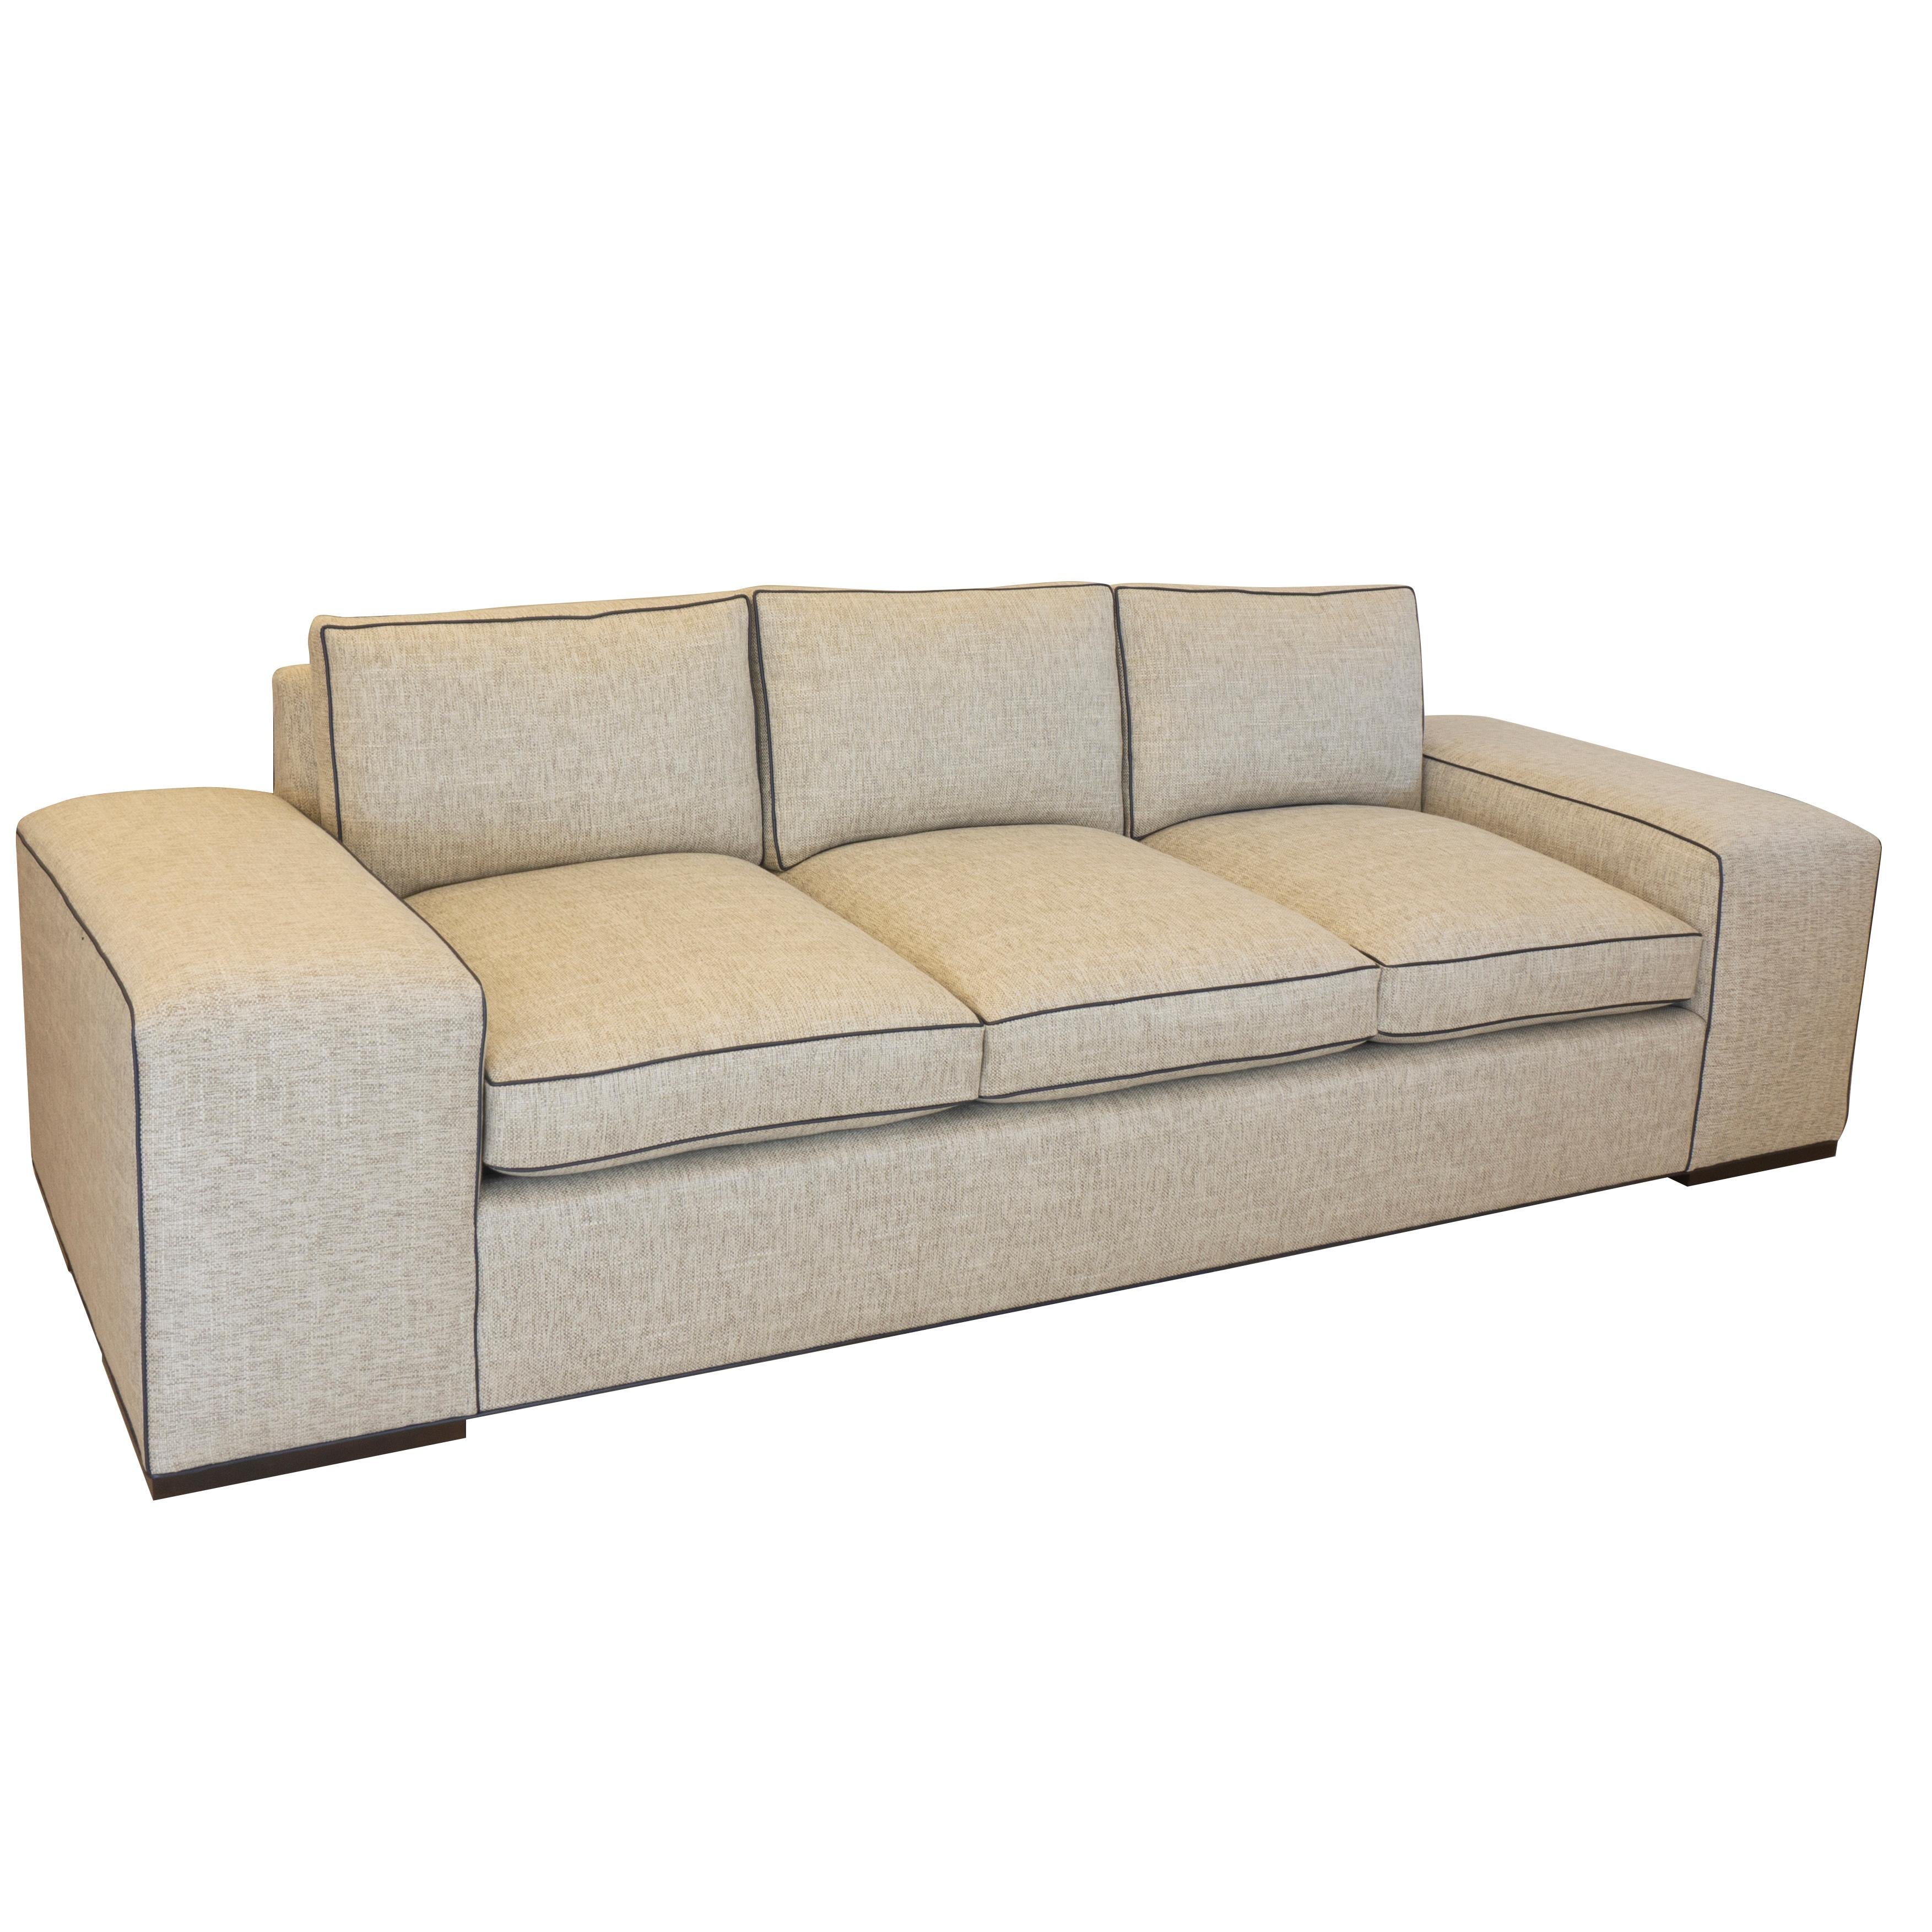 sofa with wide arms